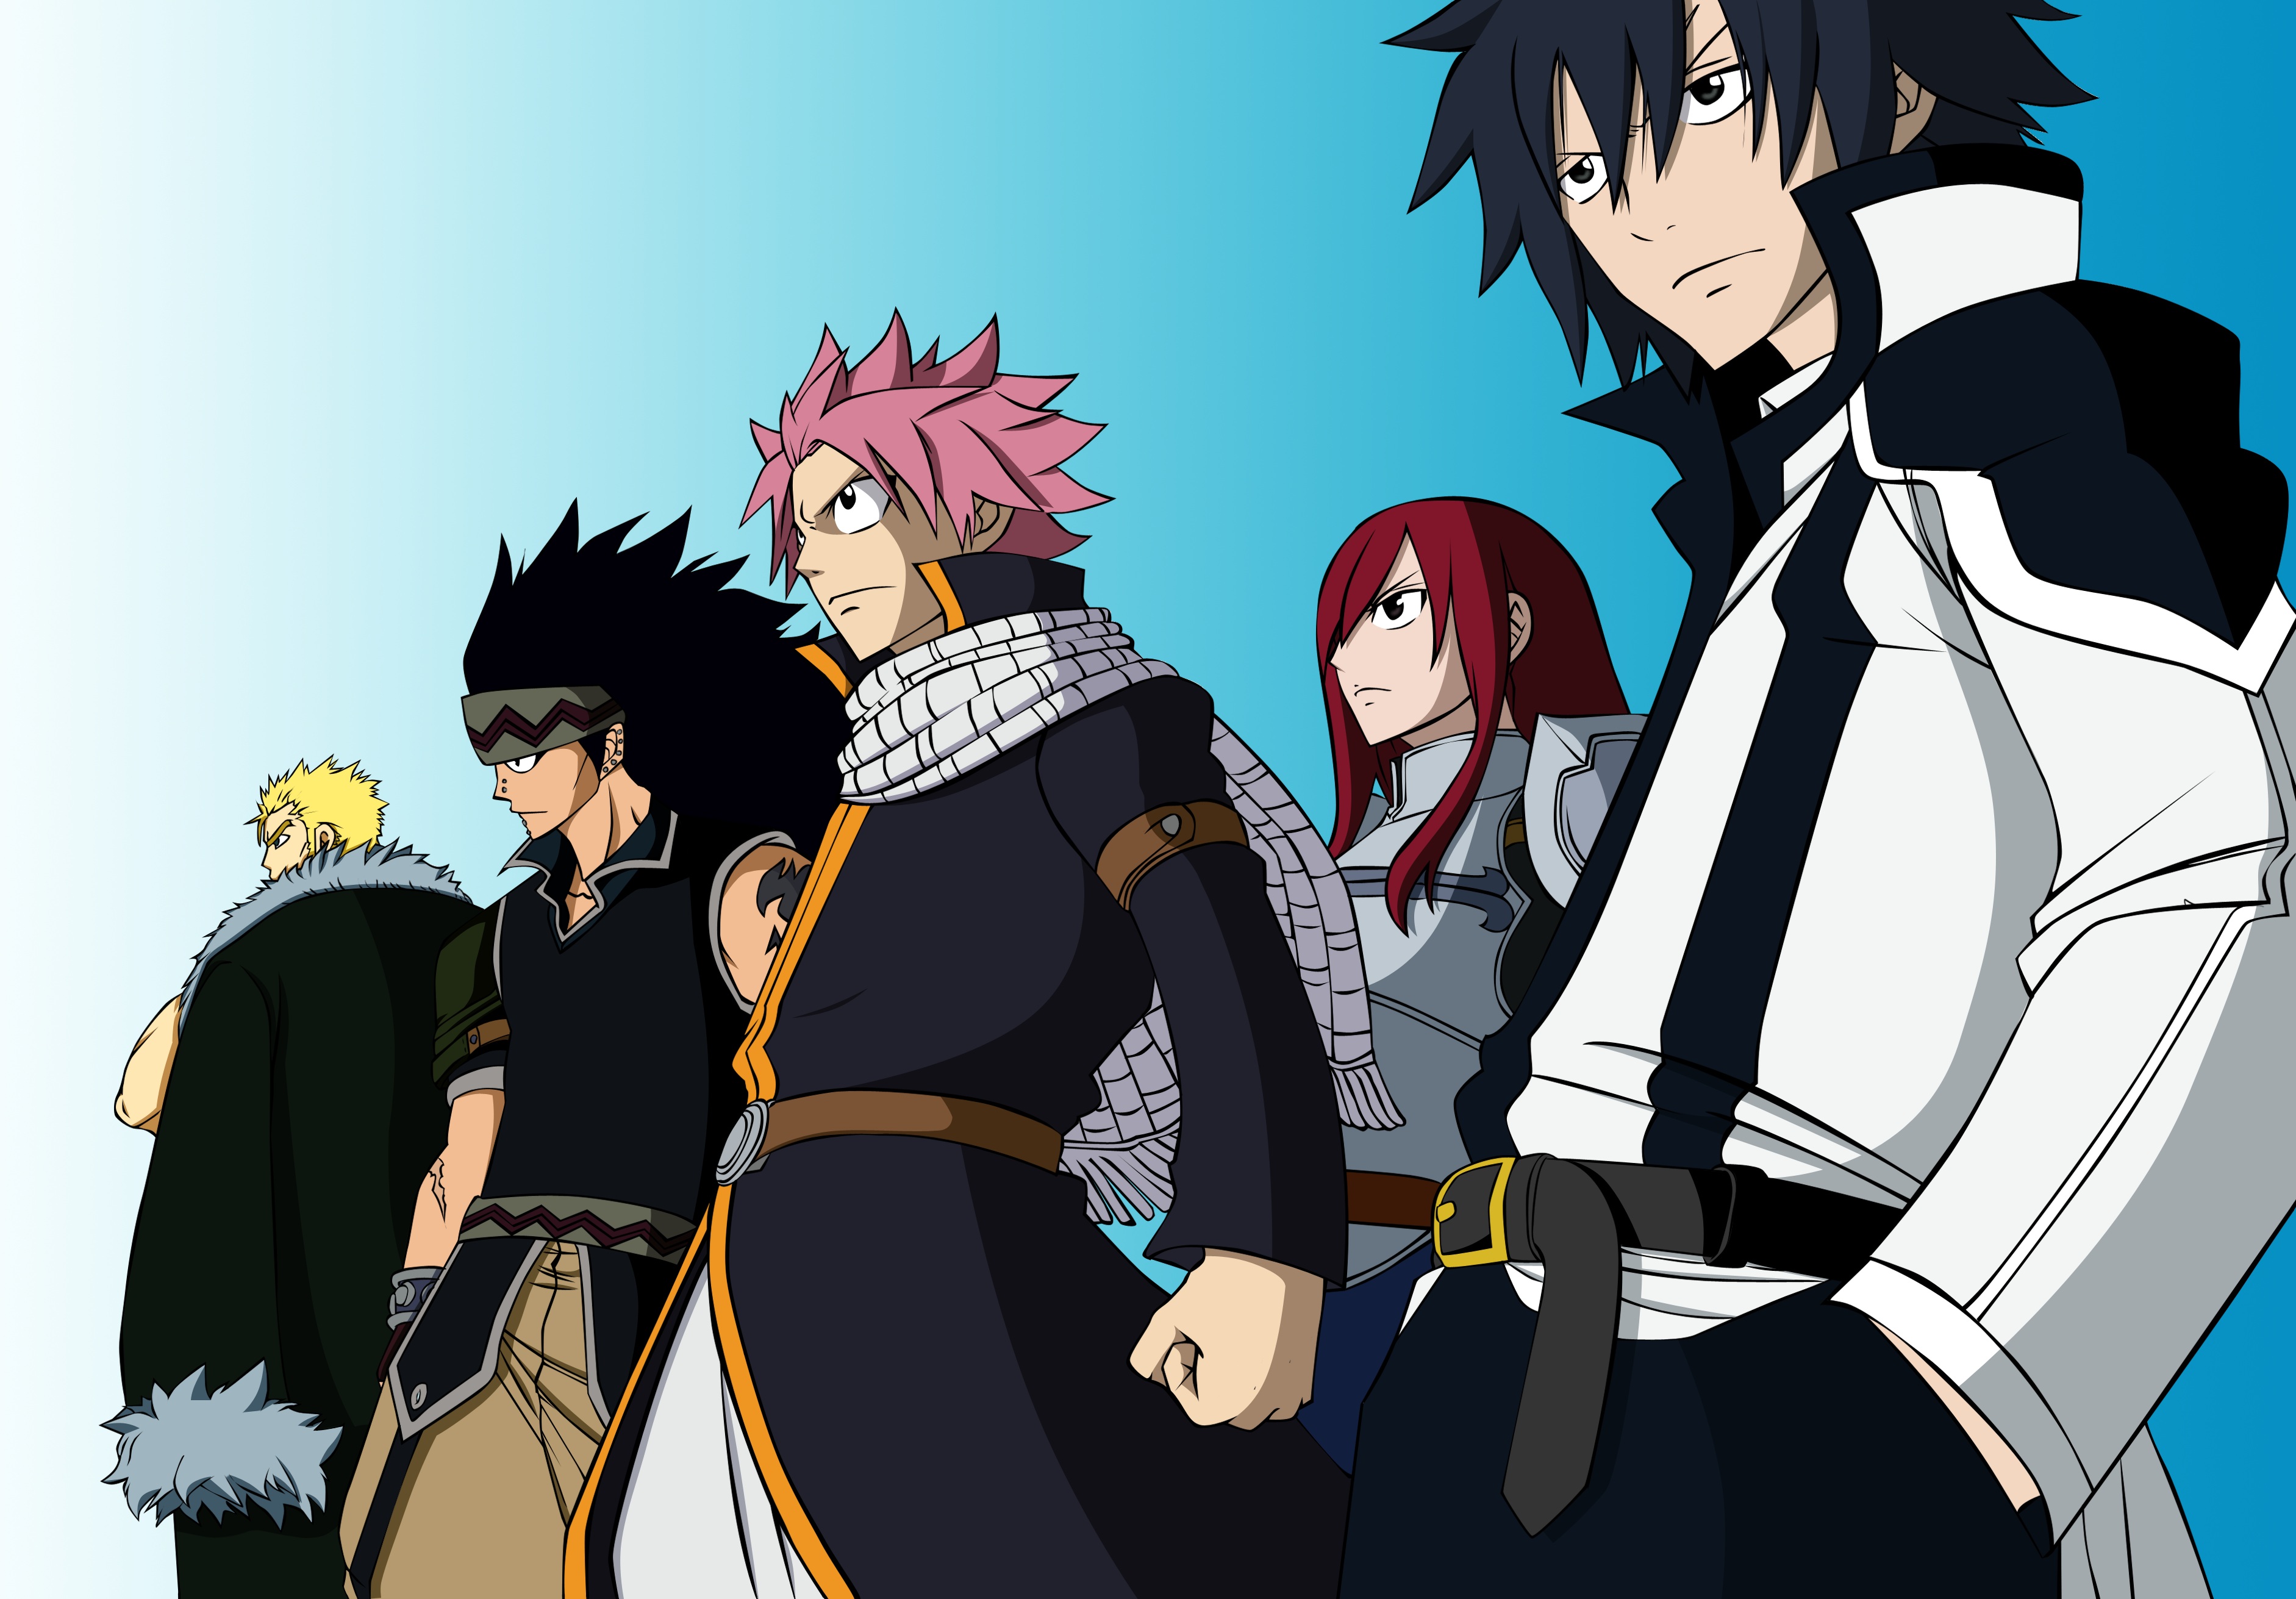 Natsu Dragneel Erza Scarlet Fairy Tail Character Anime, fairy tail